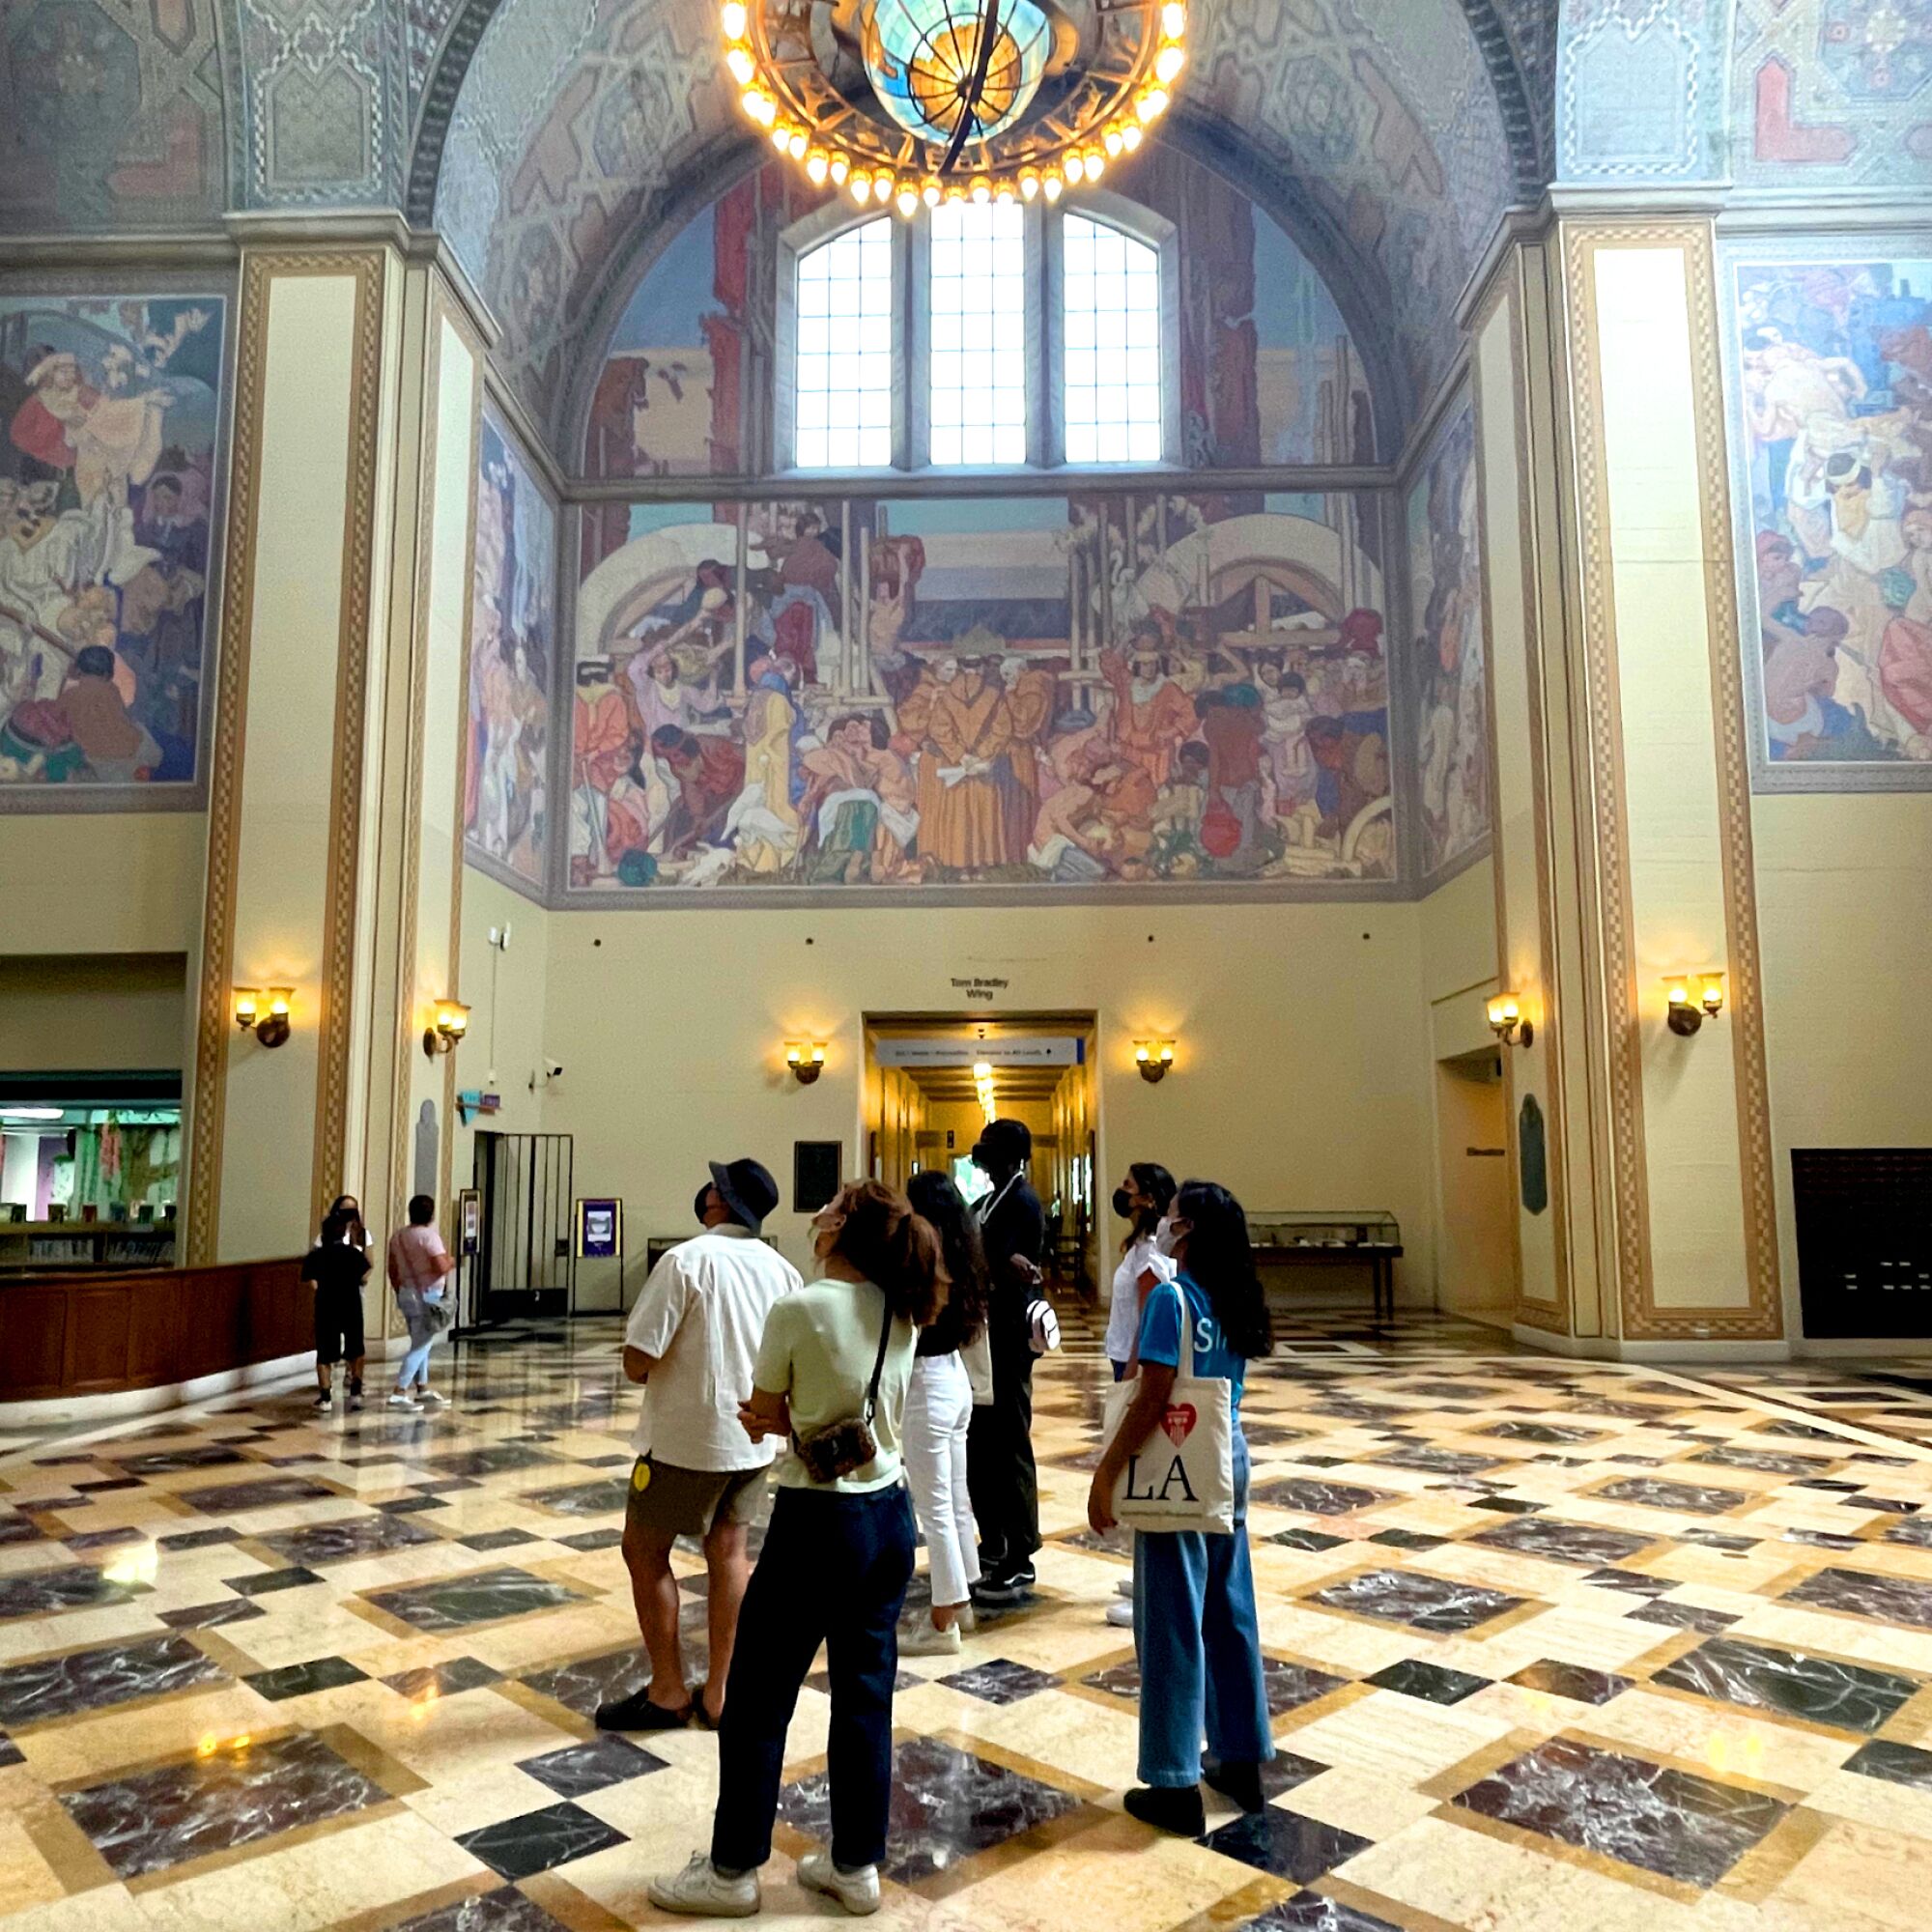 A photo of a tour group inside an ornate old building.